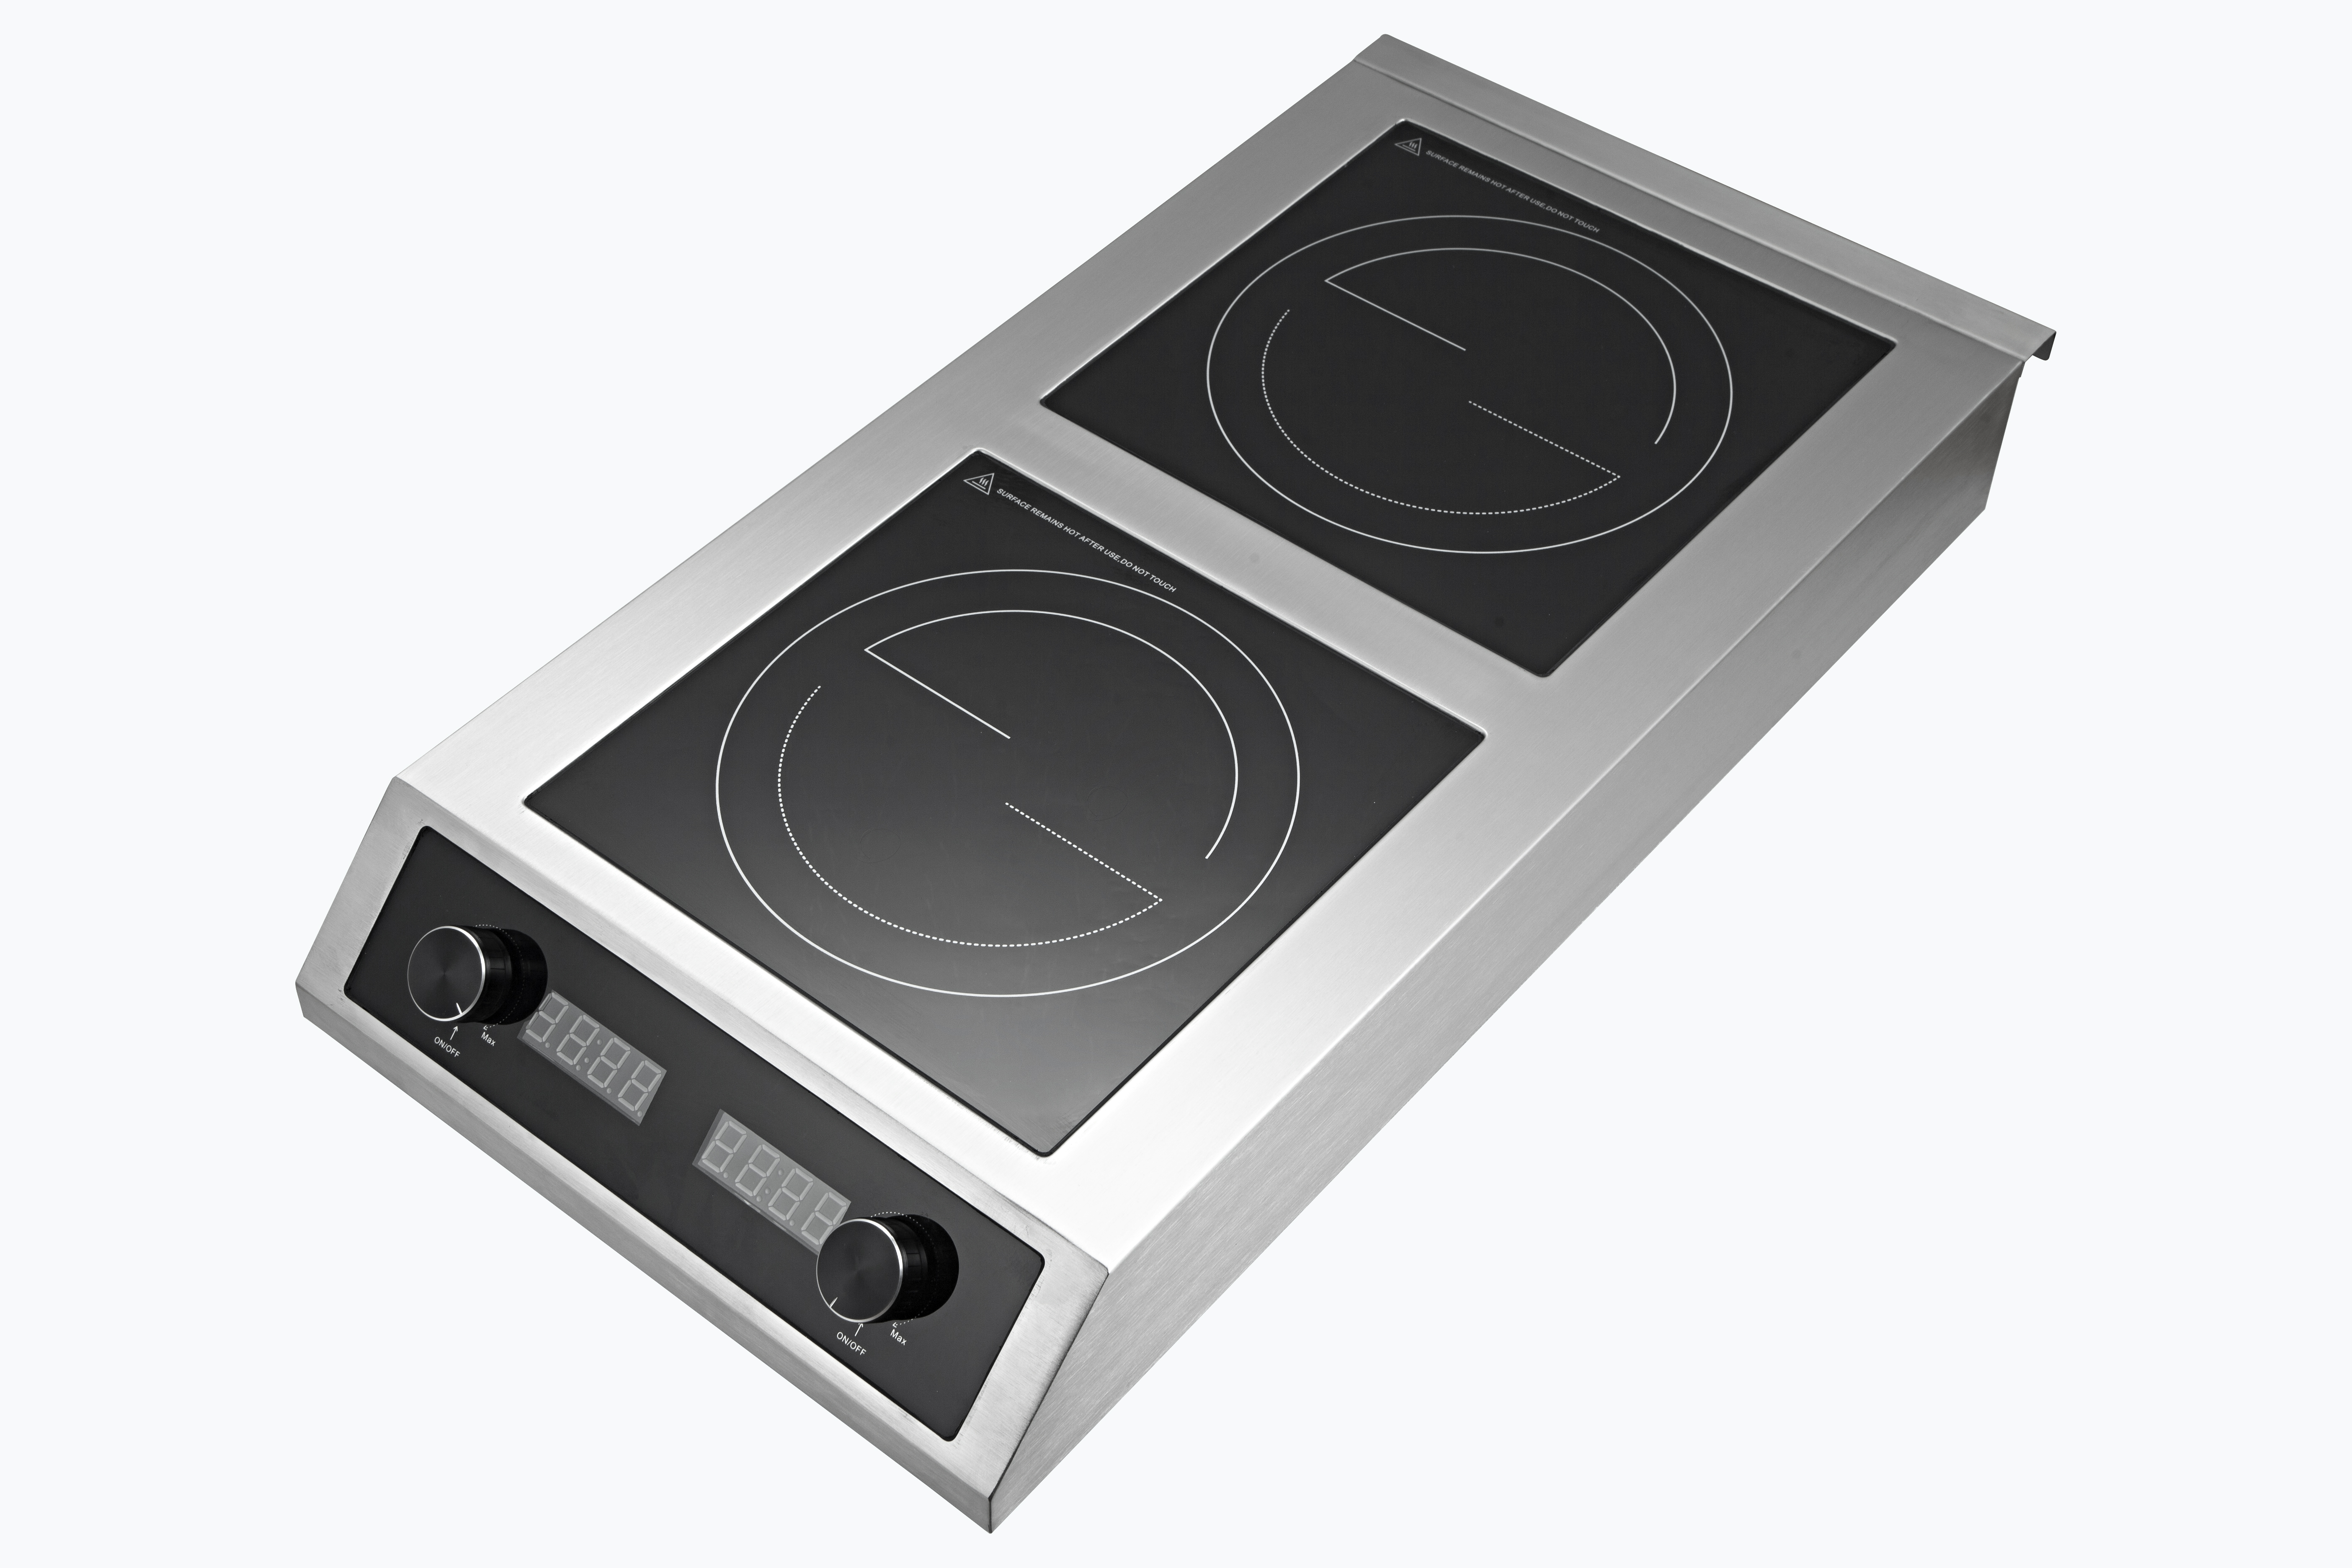 Double Burner Commercial Induction Cooktop 3500W+3500W AM-CD202